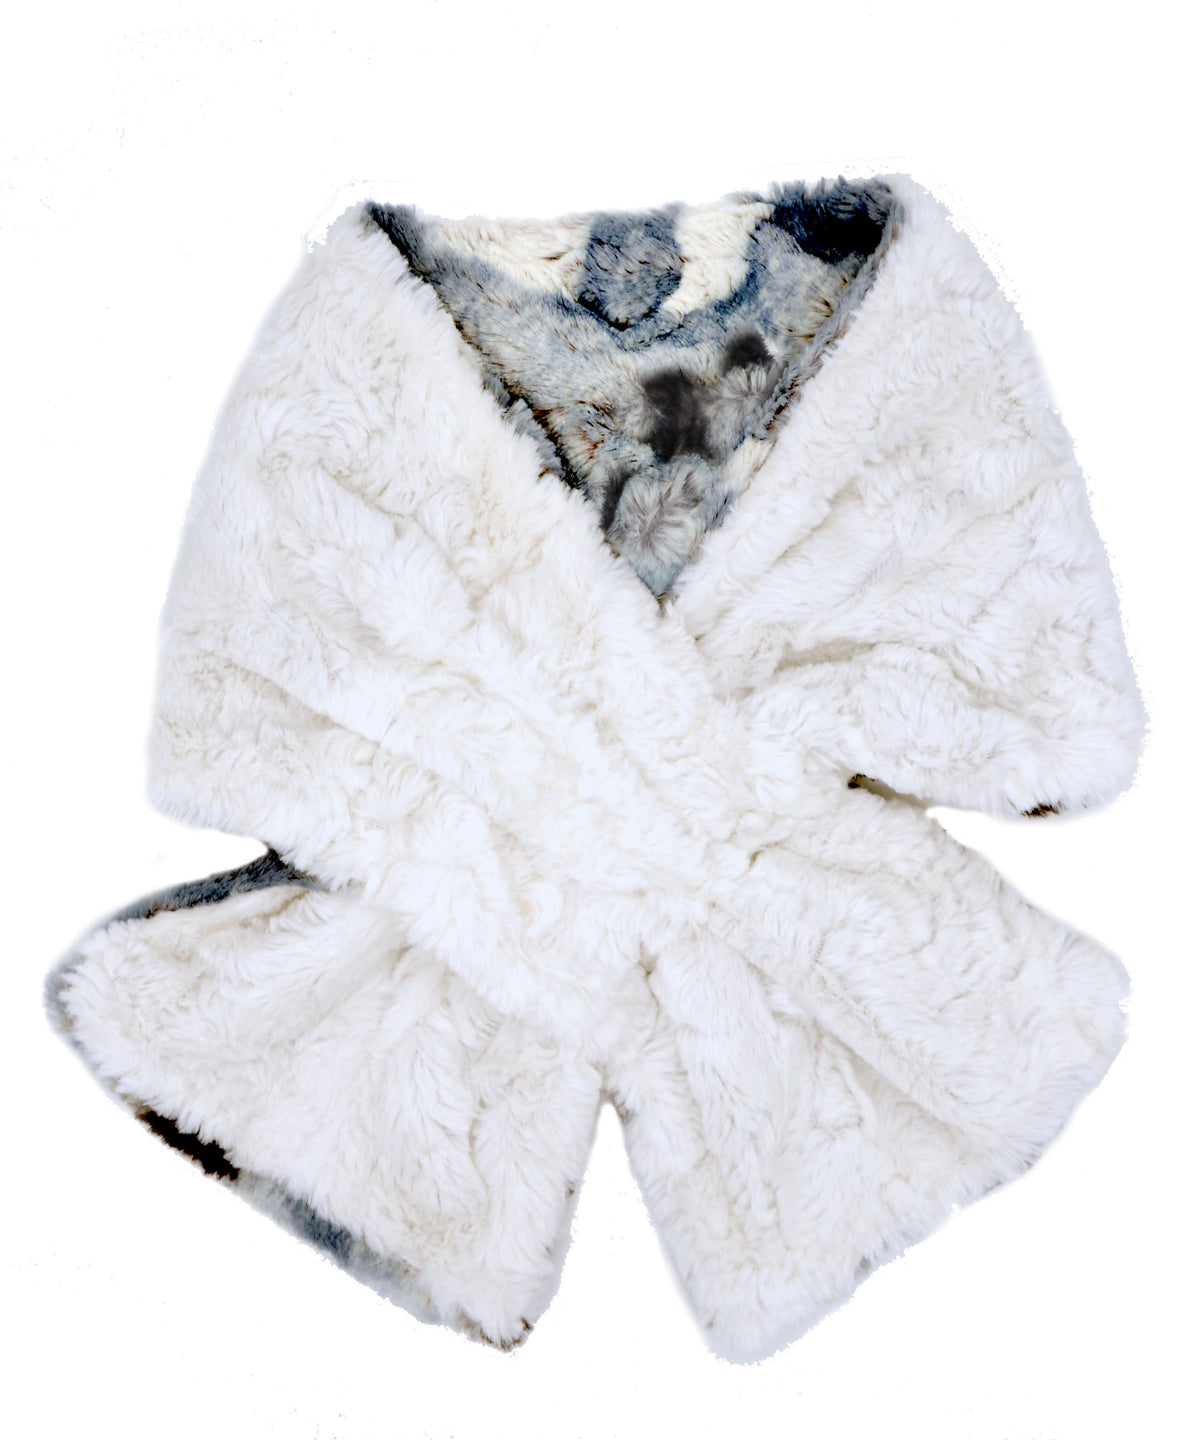 Pull Through Scarf in Rainier Sky Faux Fur with an Ivory Reverse Handmade in Seattle, WA USA by Pandemonium Millinery